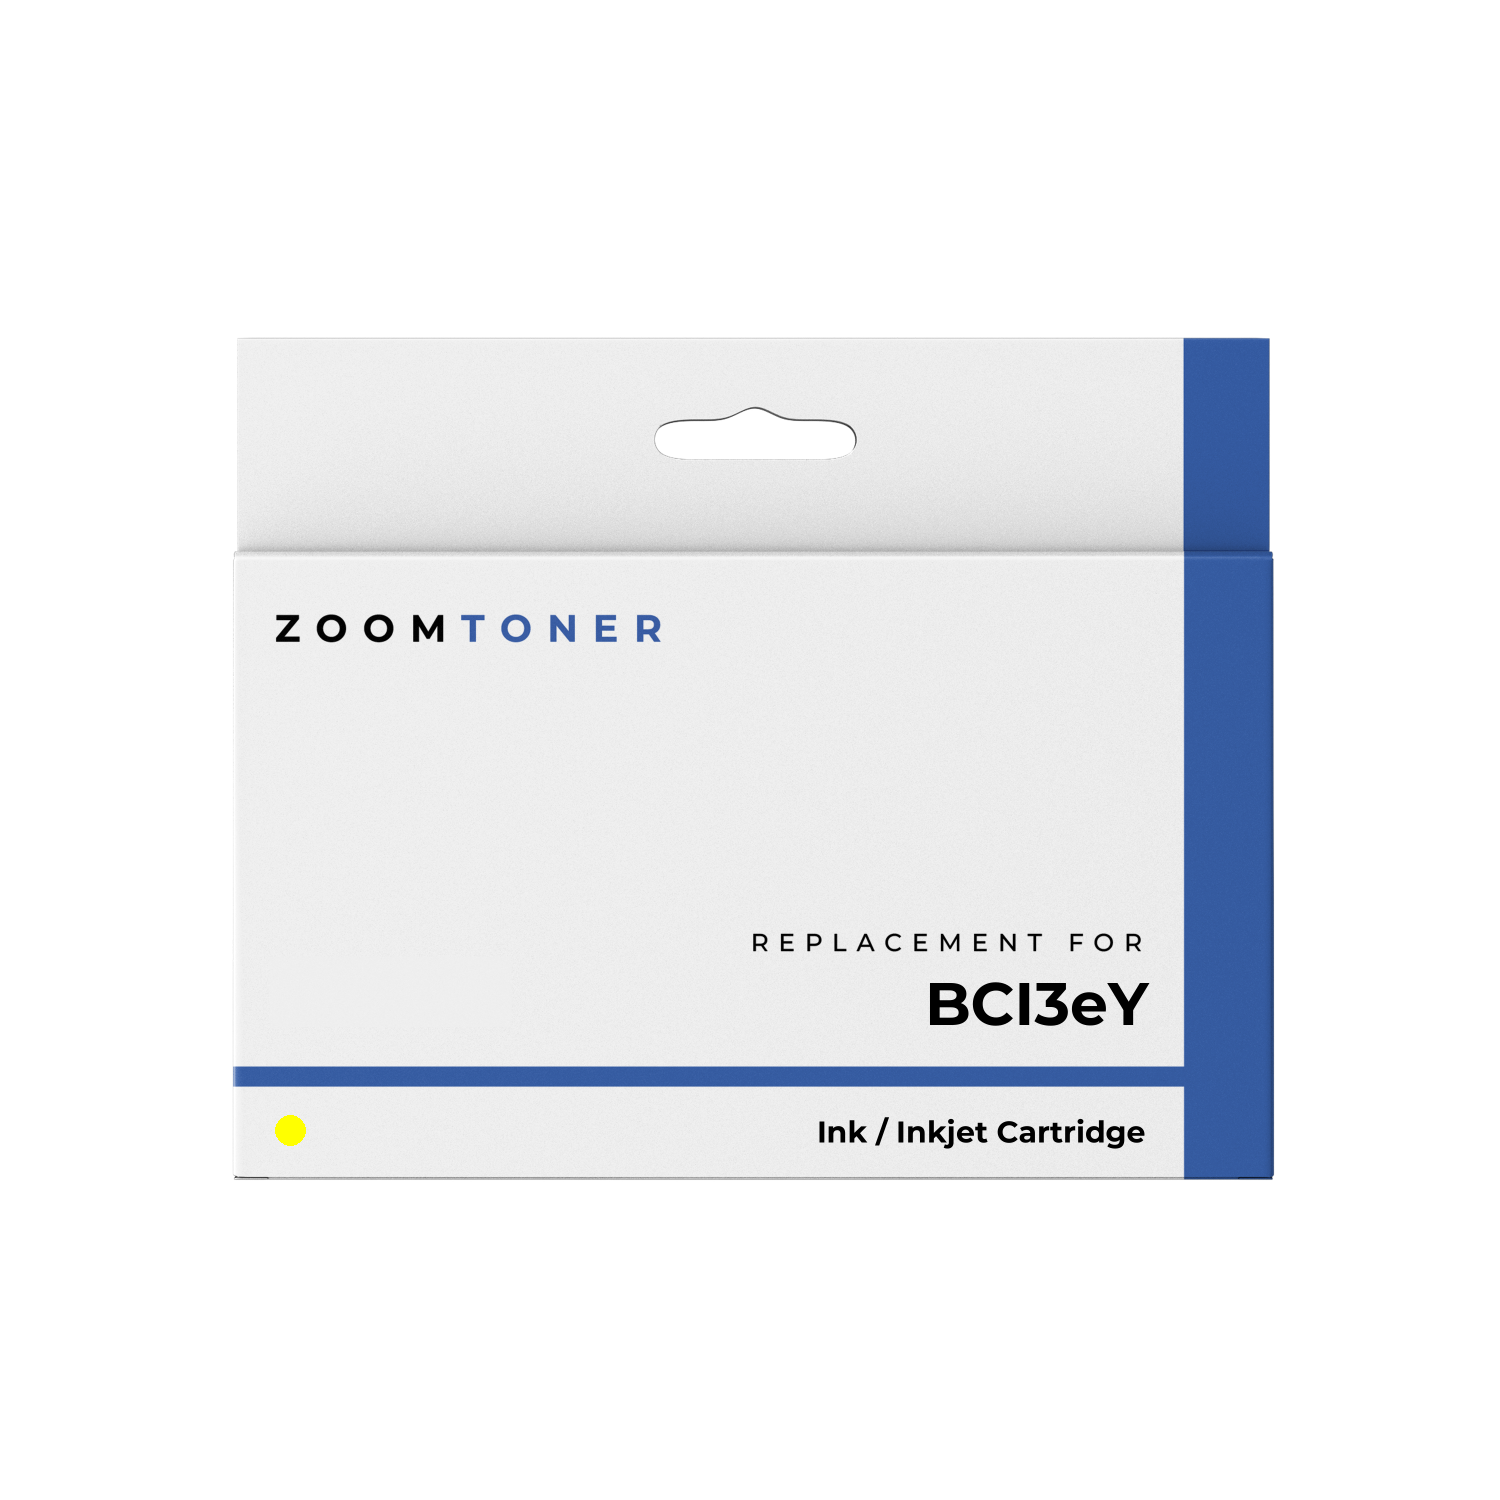 Zoomtoner Compatible CANON BCI3eY Ink / Inkjet Cartridges Yellow